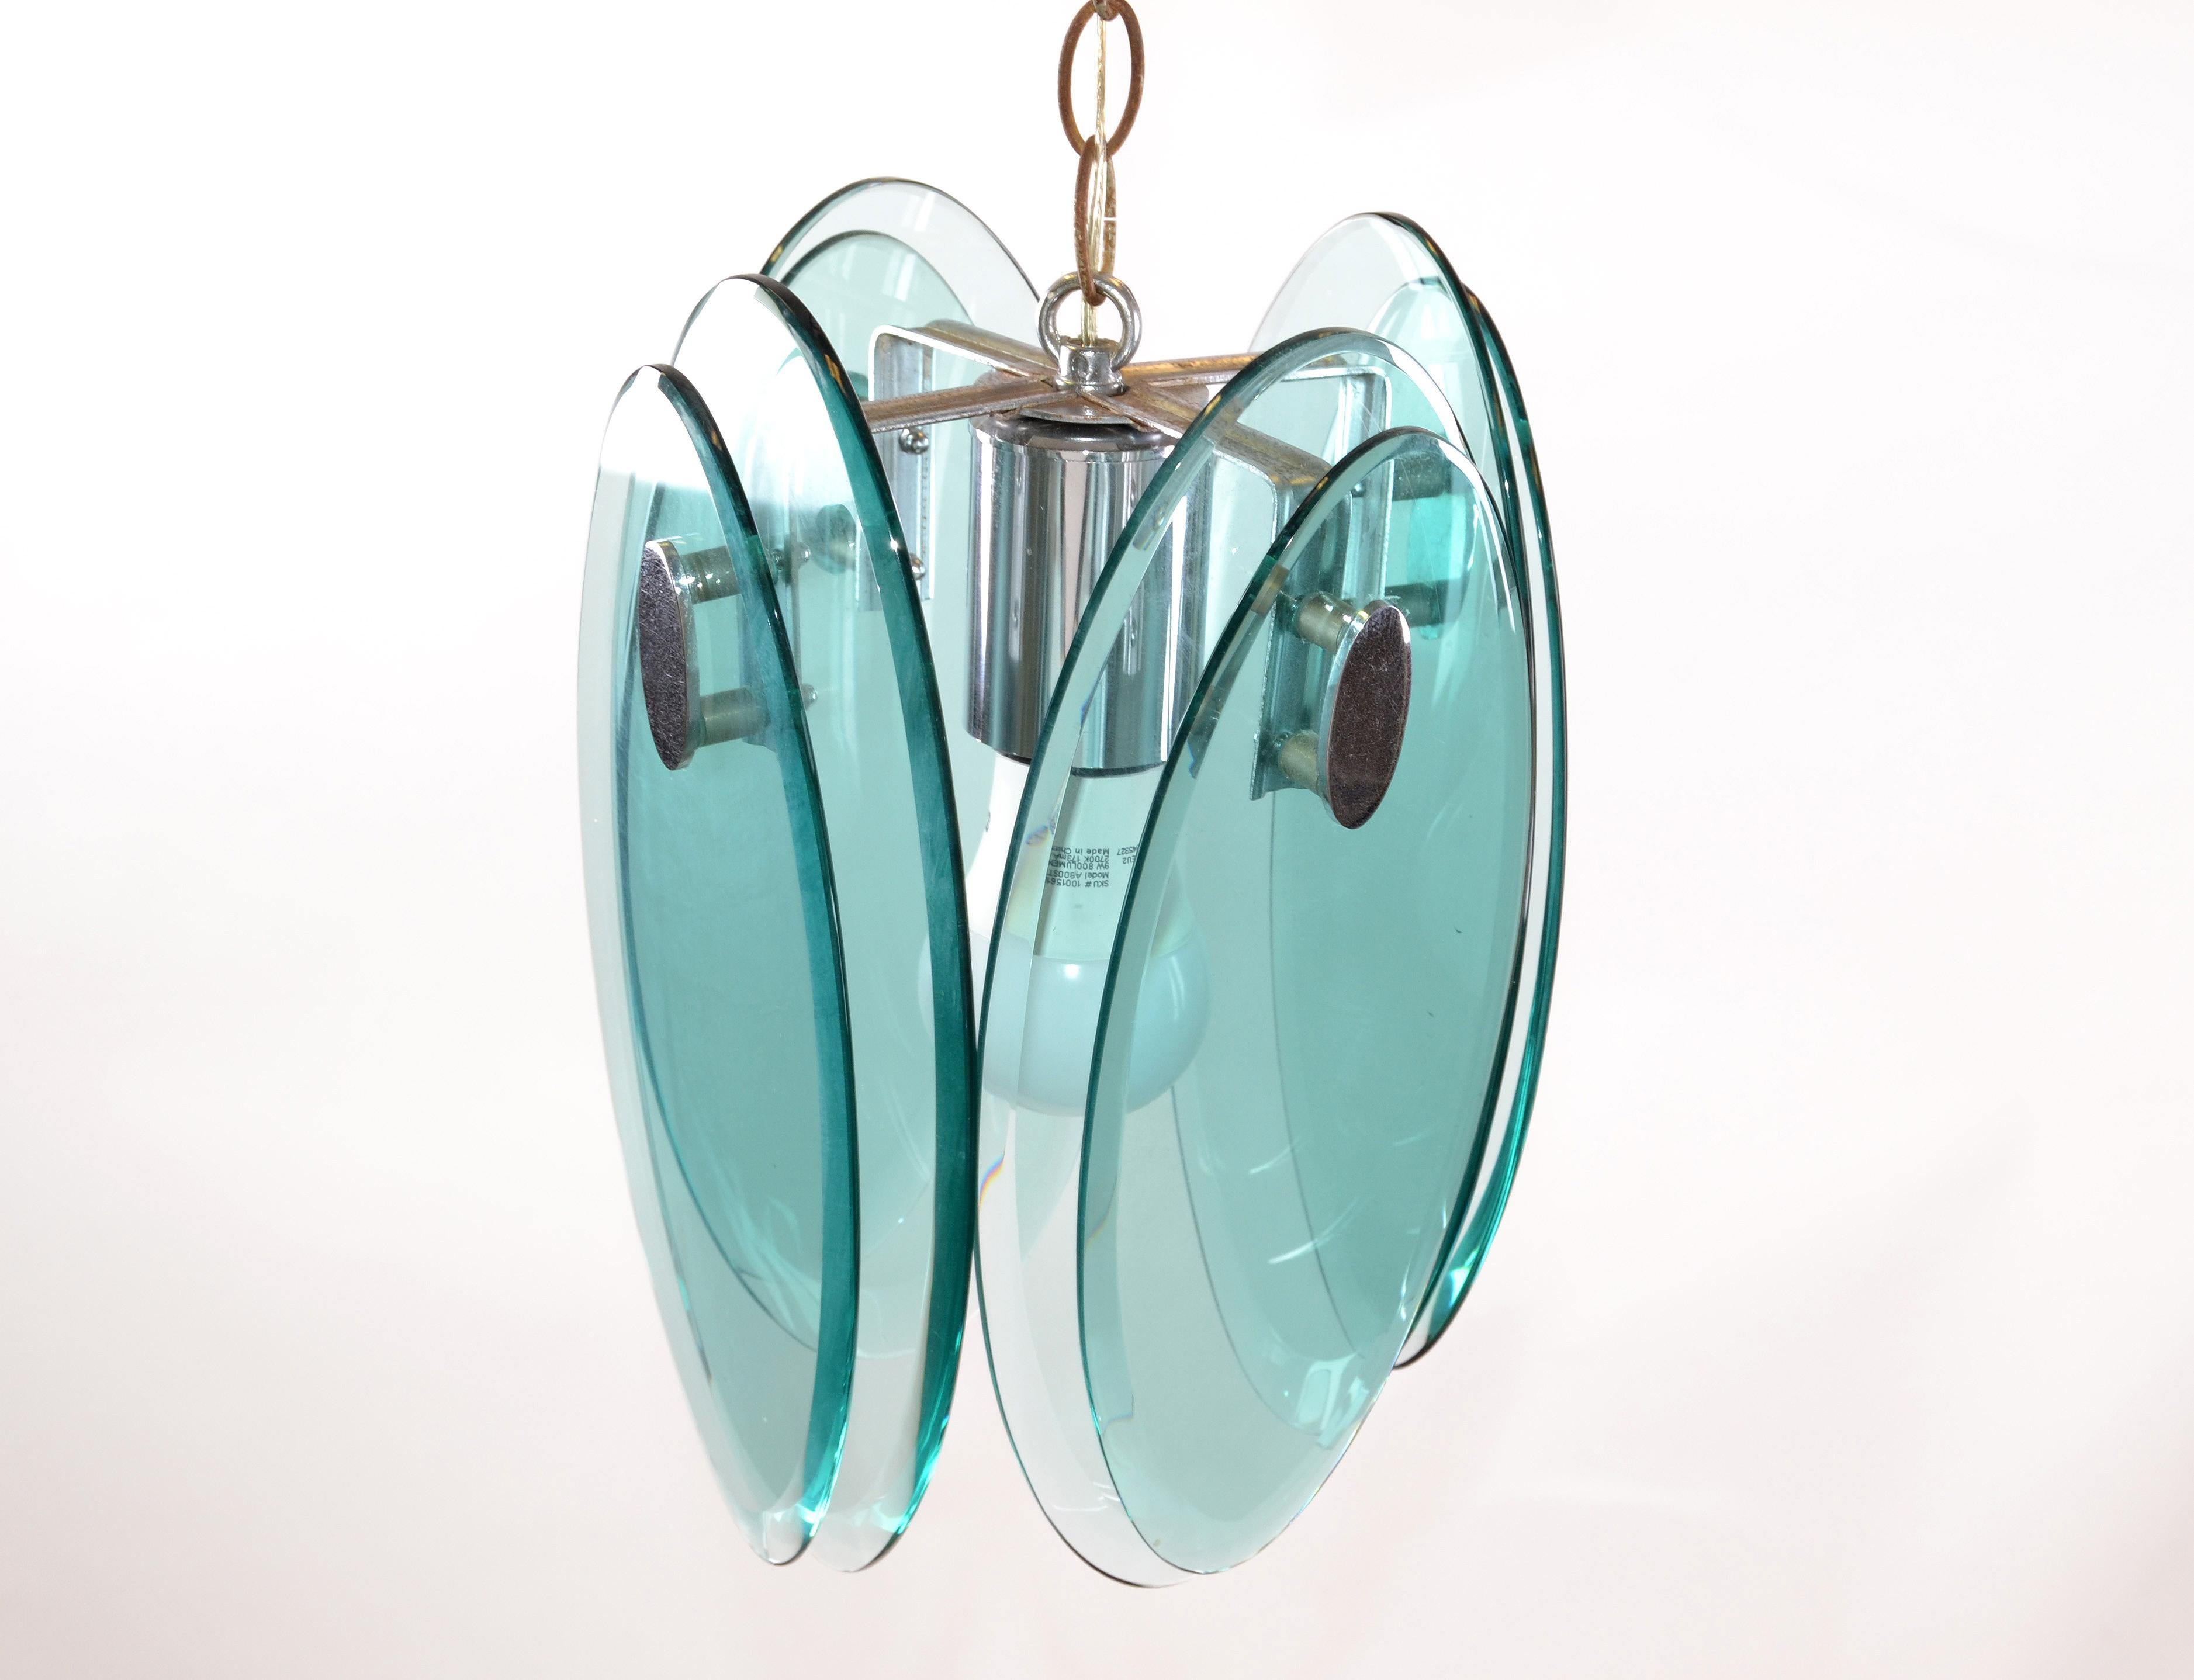 Mid-Century Modern Italian beveled thick glass and chrome pendant light fixture by Fontana Arte from the 1970s. 
The fixture has eight thick beveled glass panels, two on each side, with polished chrome concave details in the middle of each glass